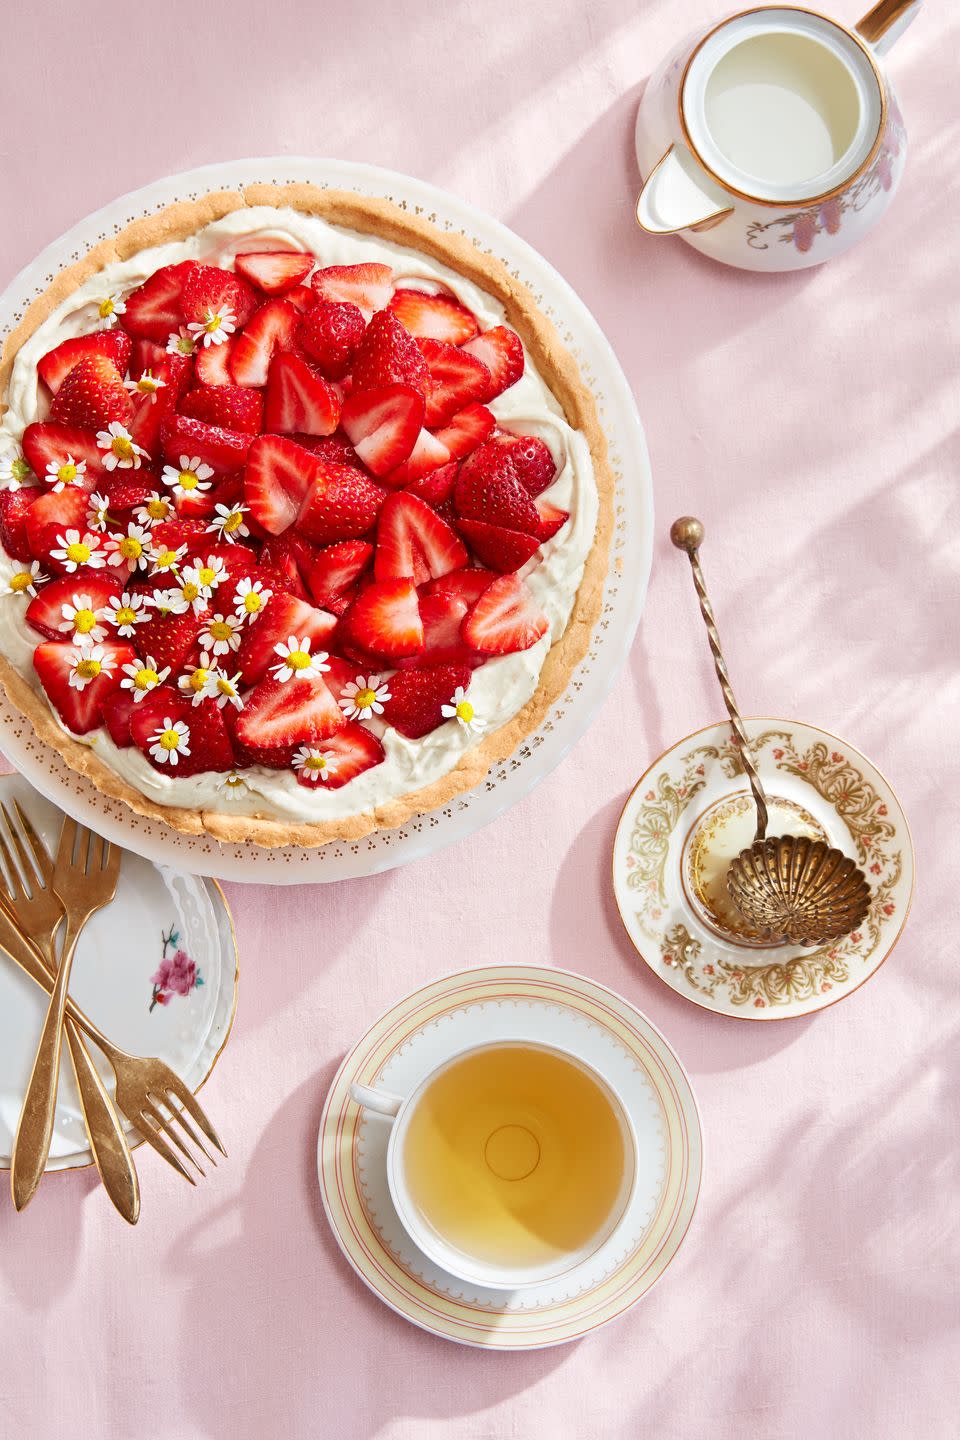 chamomile mascarpone tart with fresh strawberries and chamomile flower garnish on a pink tablecloth, with a cup of tea